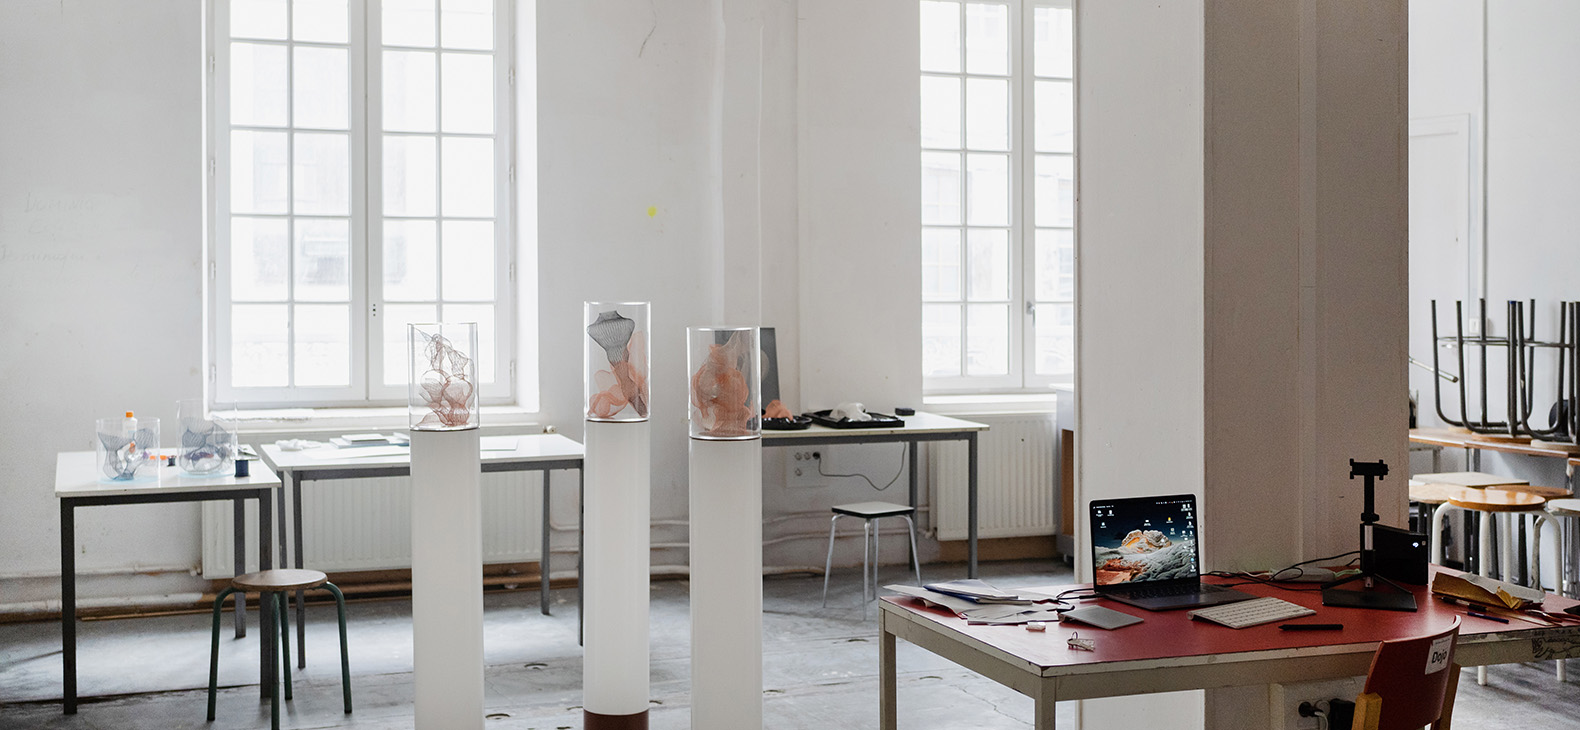 Residency Program Schafhof / District of Upper Bavaria: Focus > Orléans; Image: View of one of the studios on site; works by artist Julia Smirnova can be seen in the room.